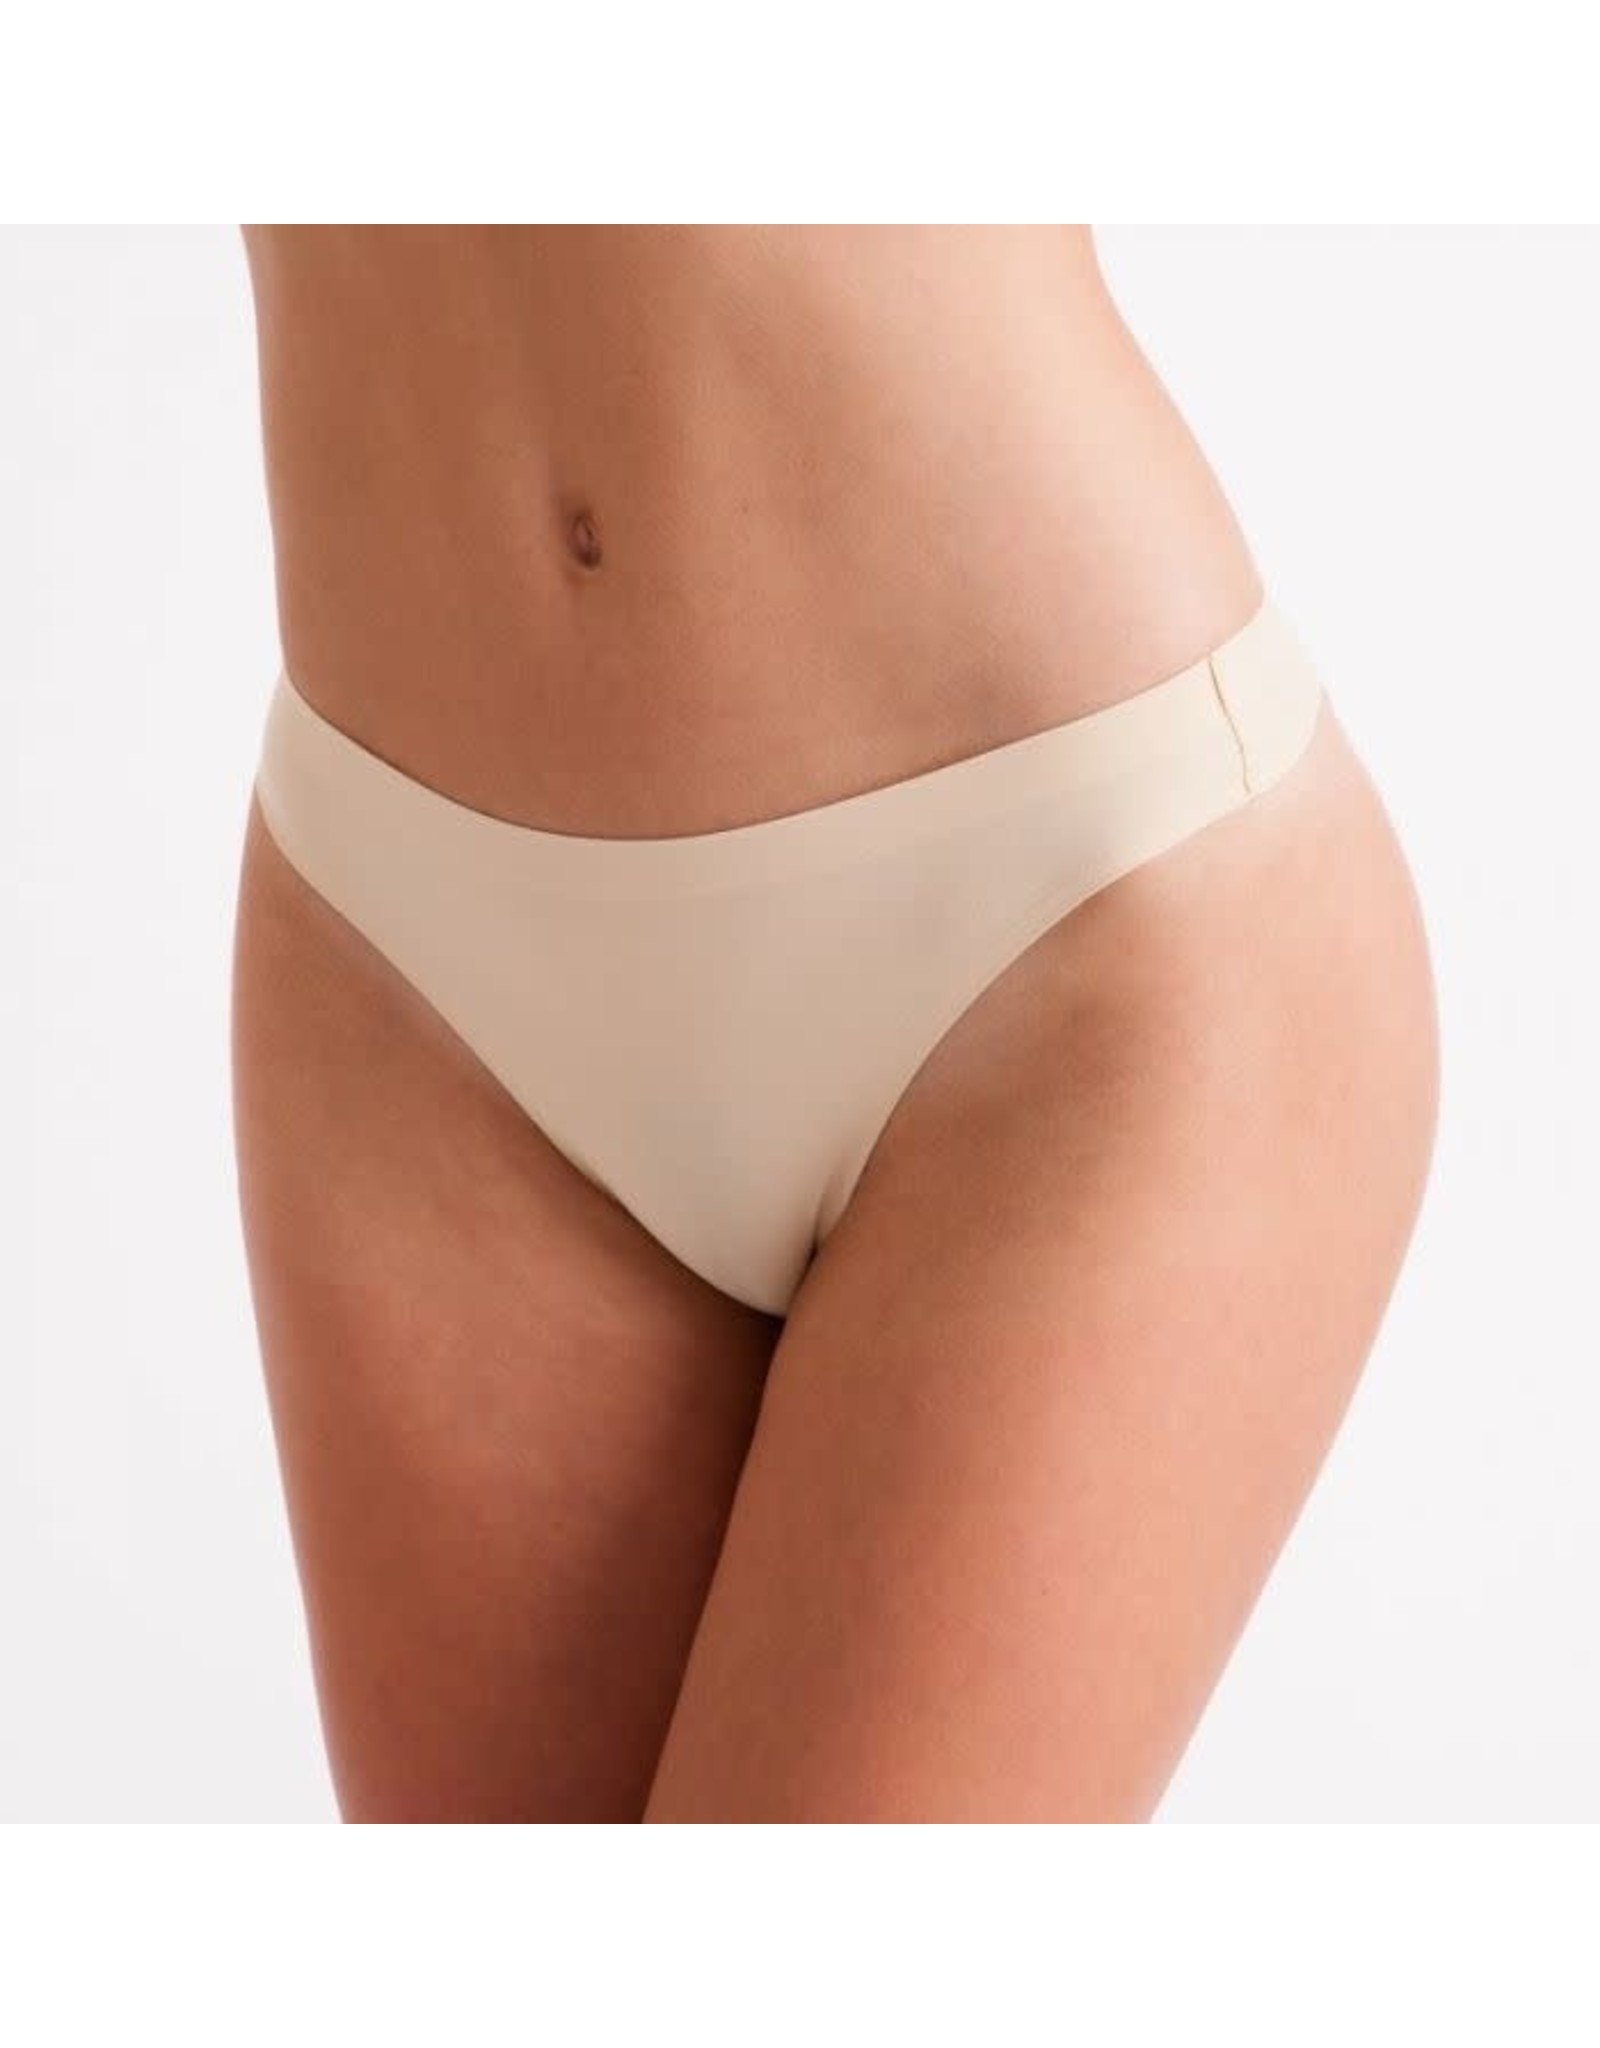 Silky Dance Invisible Low Rise Thong